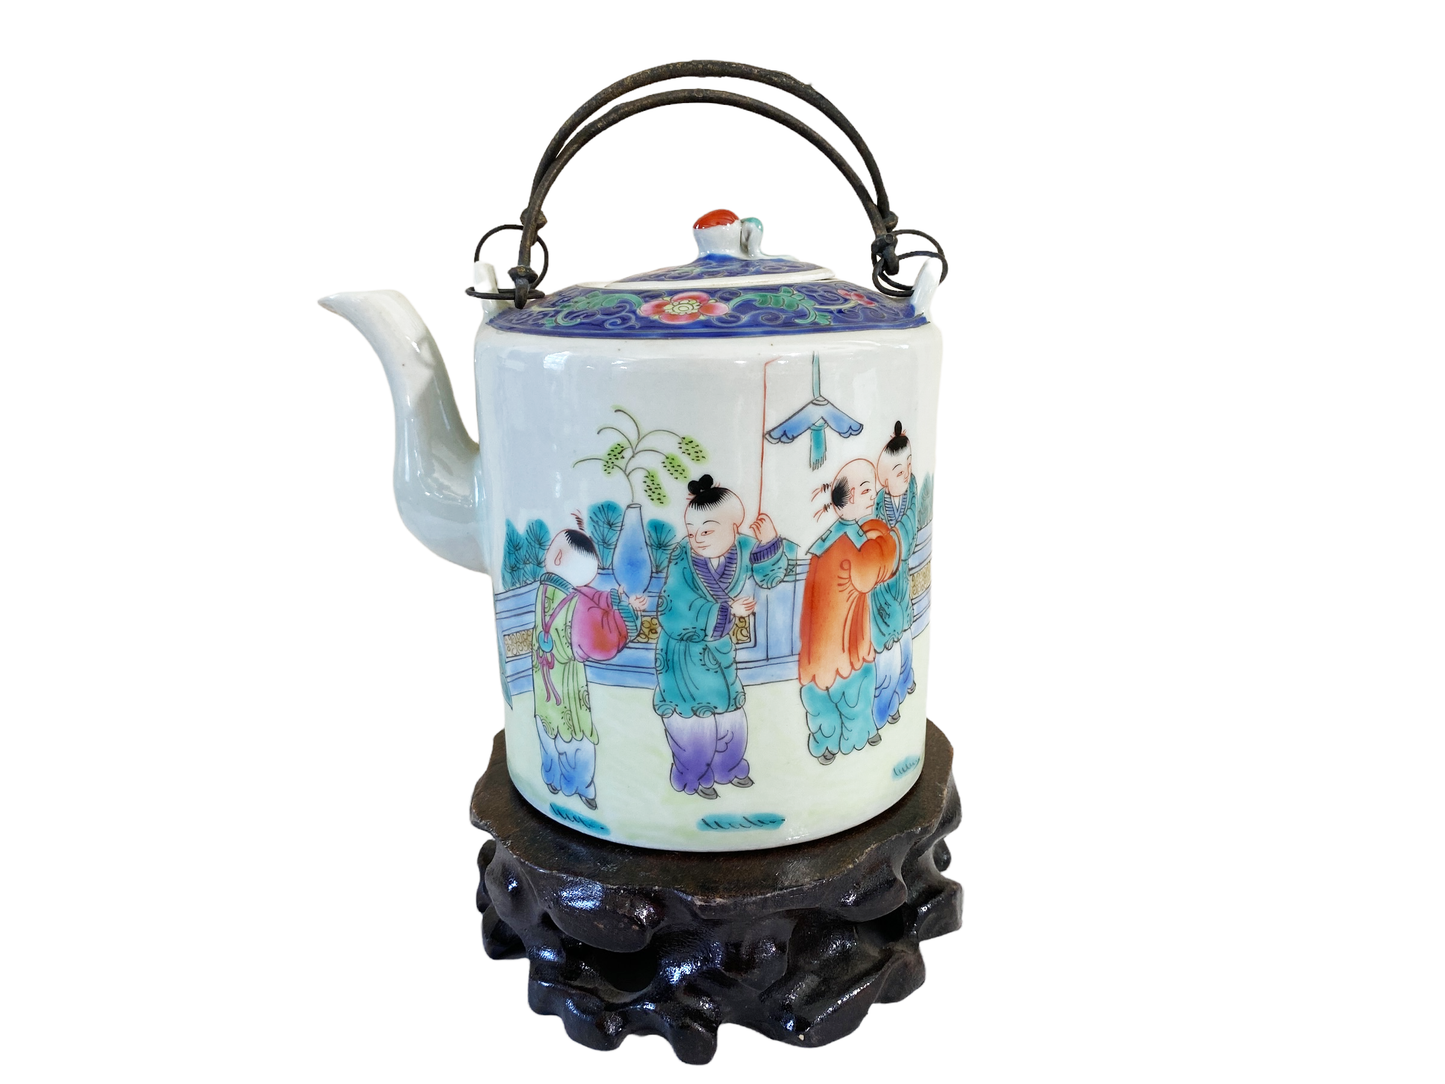 #4706 Chinoiserie Famille Rose Teapot With Iron Handles